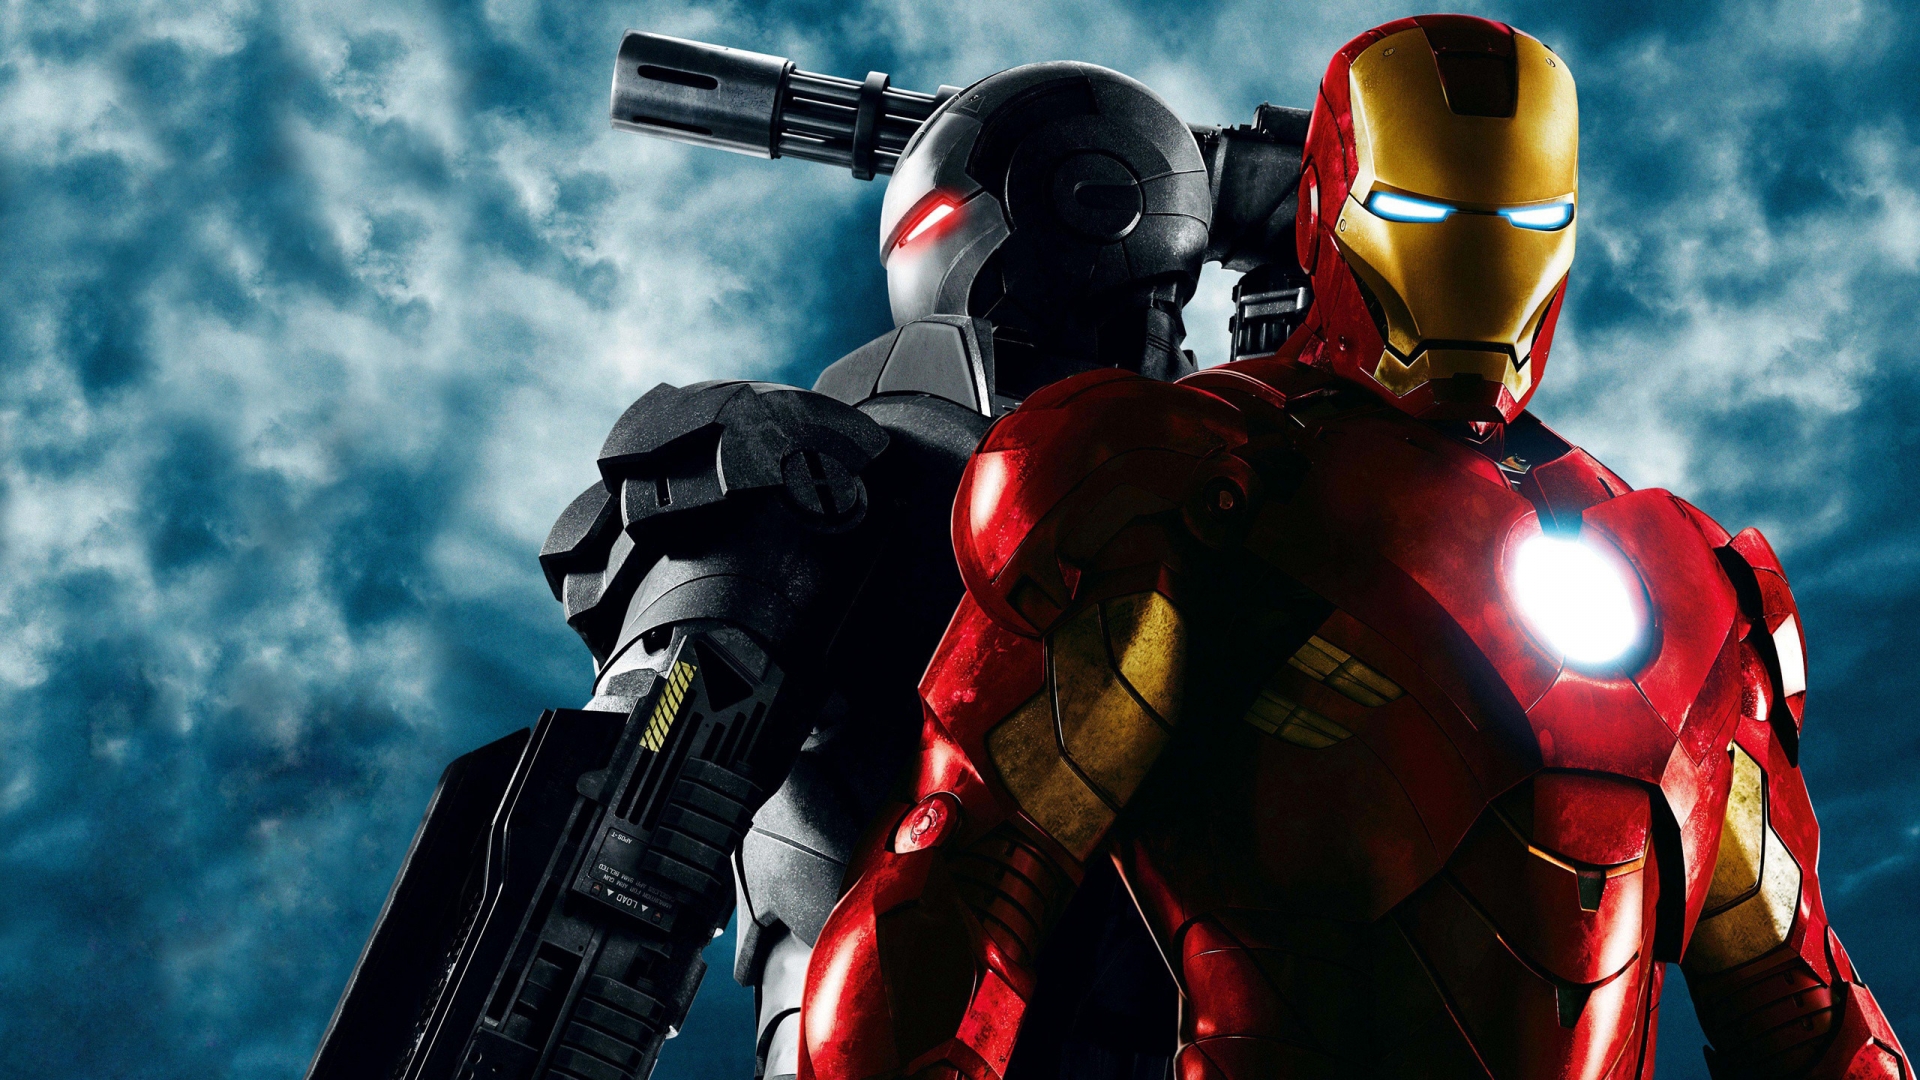 Iron Man 2 Poster for 1920 x 1080 HDTV 1080p resolution